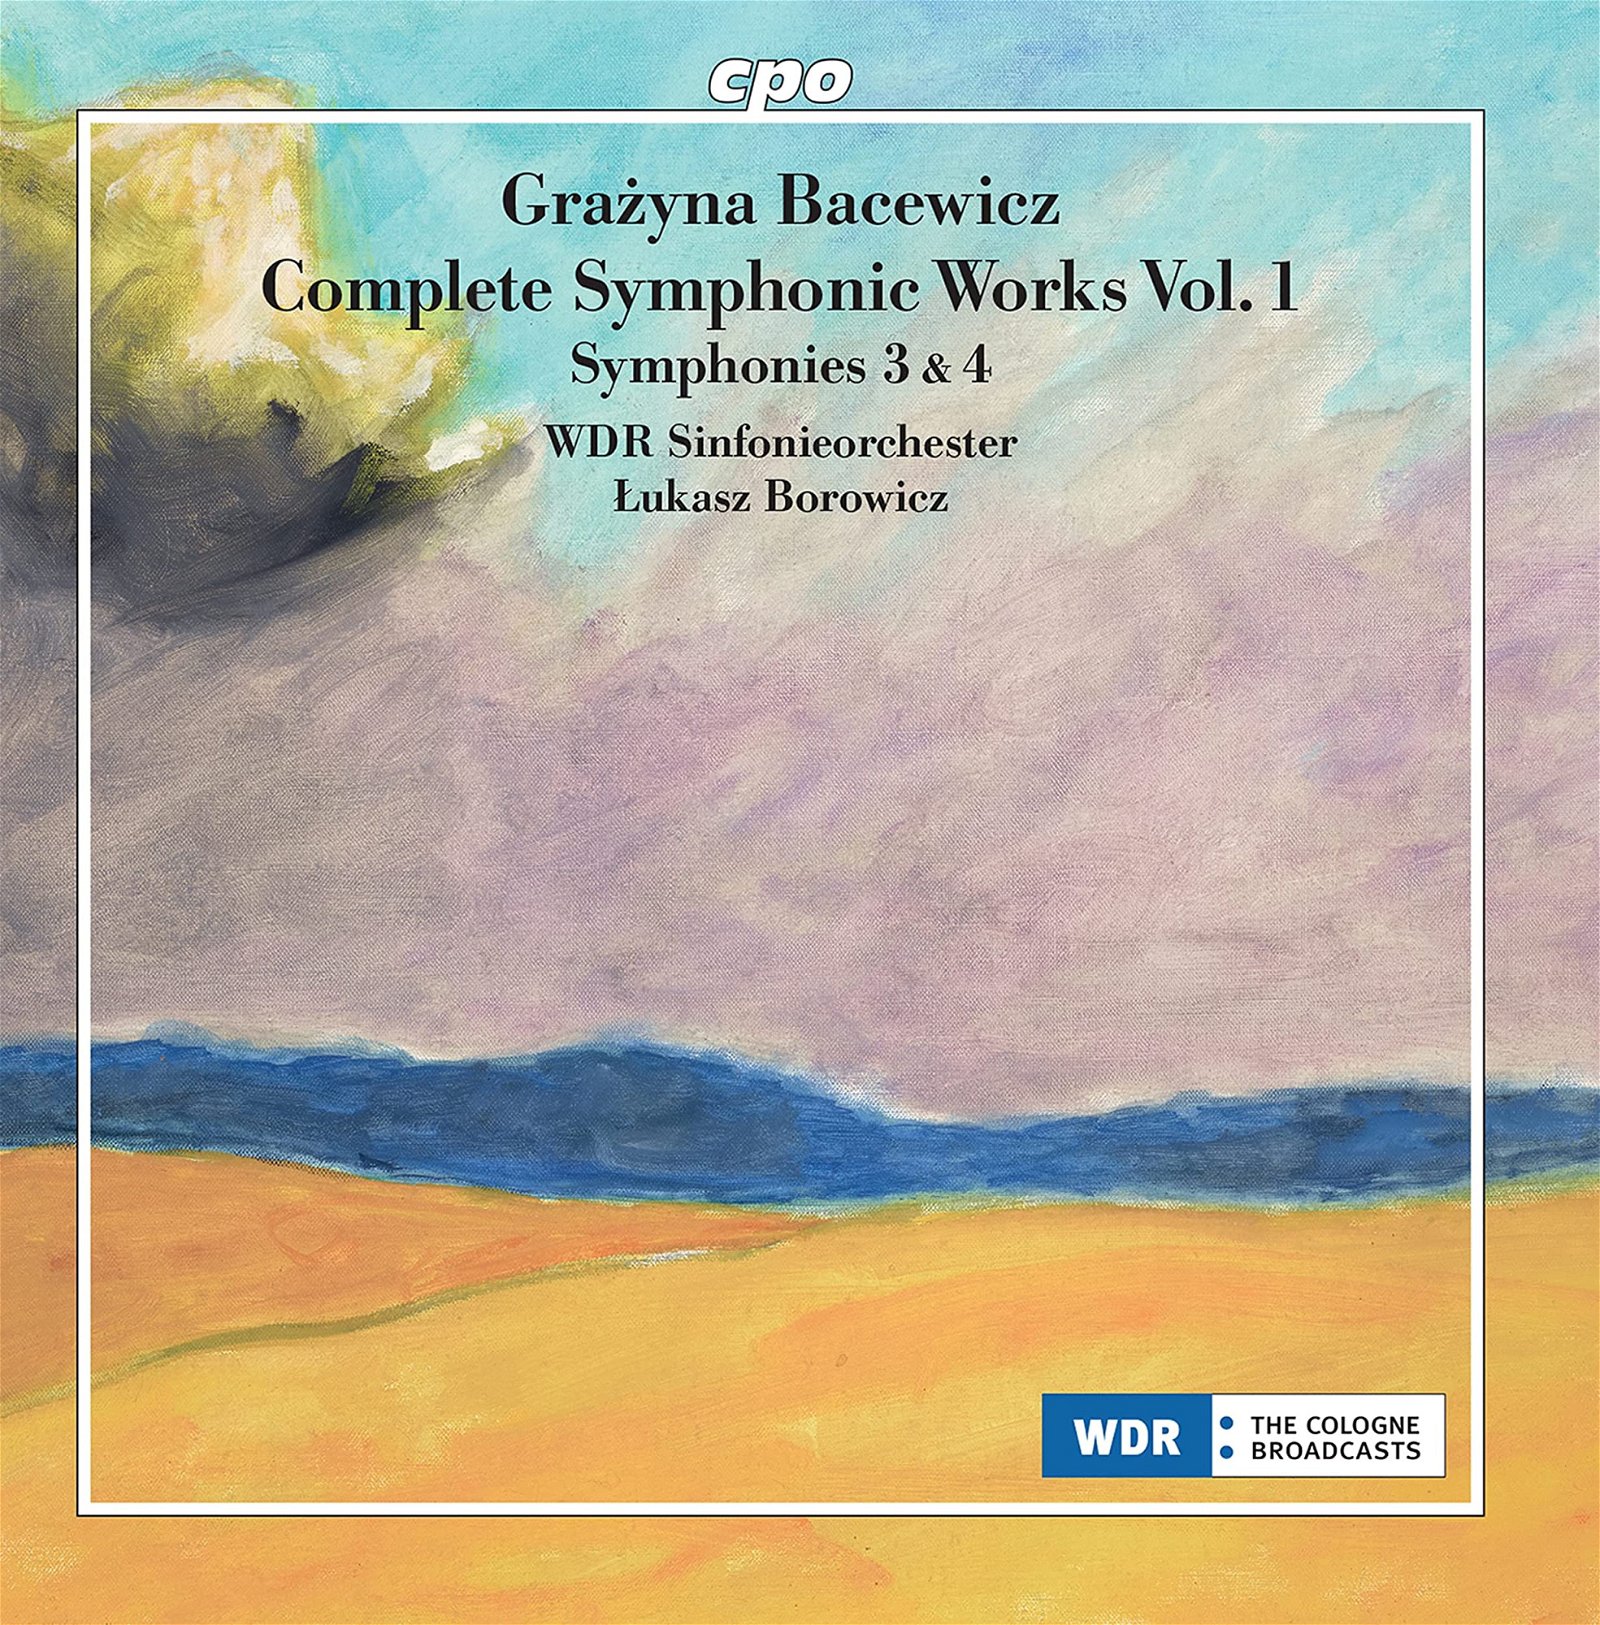 CD Shop - WDR SINFONIEORCHESTER KOL BACEWICZ: COMPLETE SYMPHONIC WORKS VOL.1: NOS 3 & 4